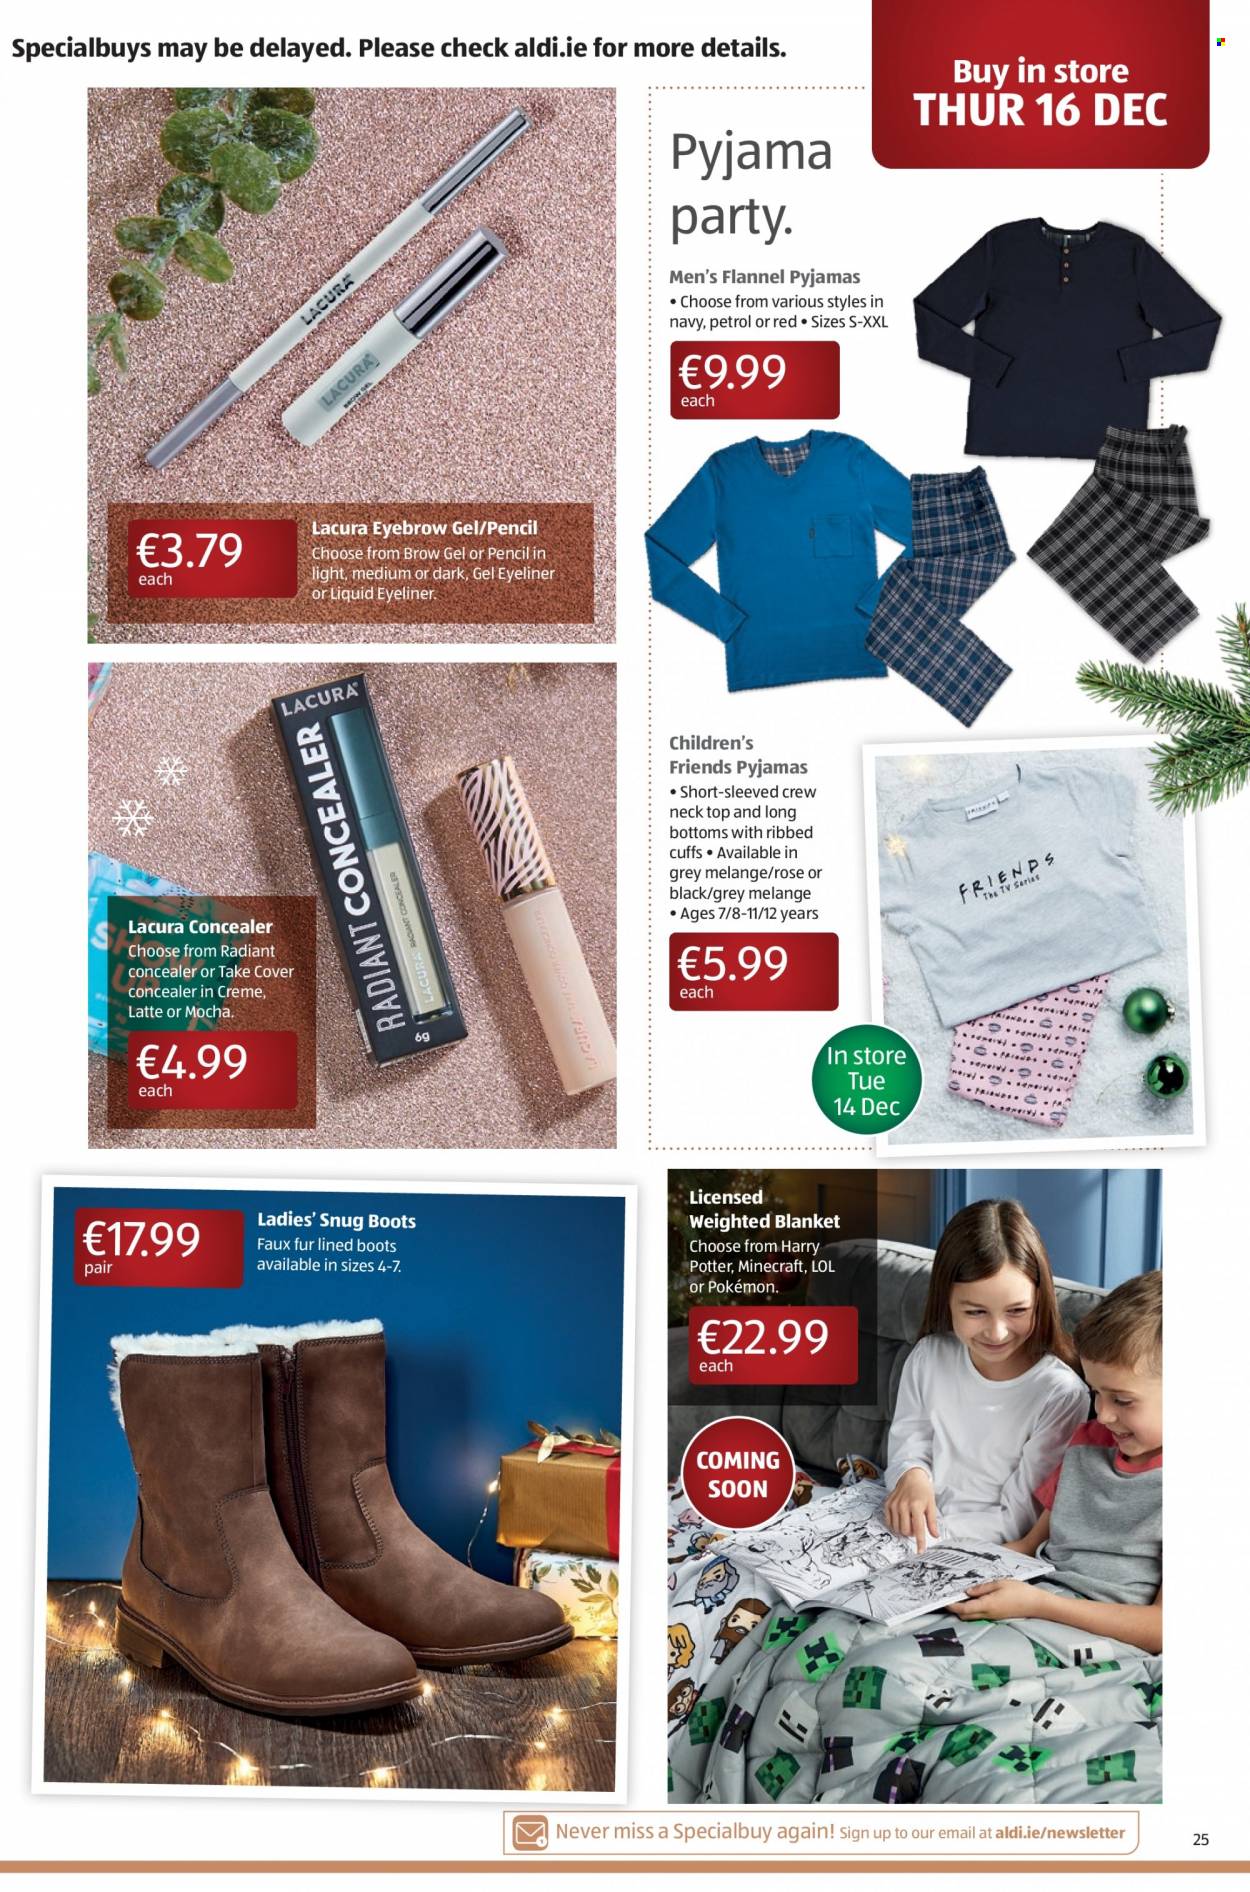 thumbnail - Aldi offer  - 13.12.2021 - 19.12.2021 - Sales products - boots, wine, rosé wine, eyeliner, Harry Potter, Pokémon, pencil, blanket, weighted blanket, Snug, pajamas, rose, corrector. Page 25.